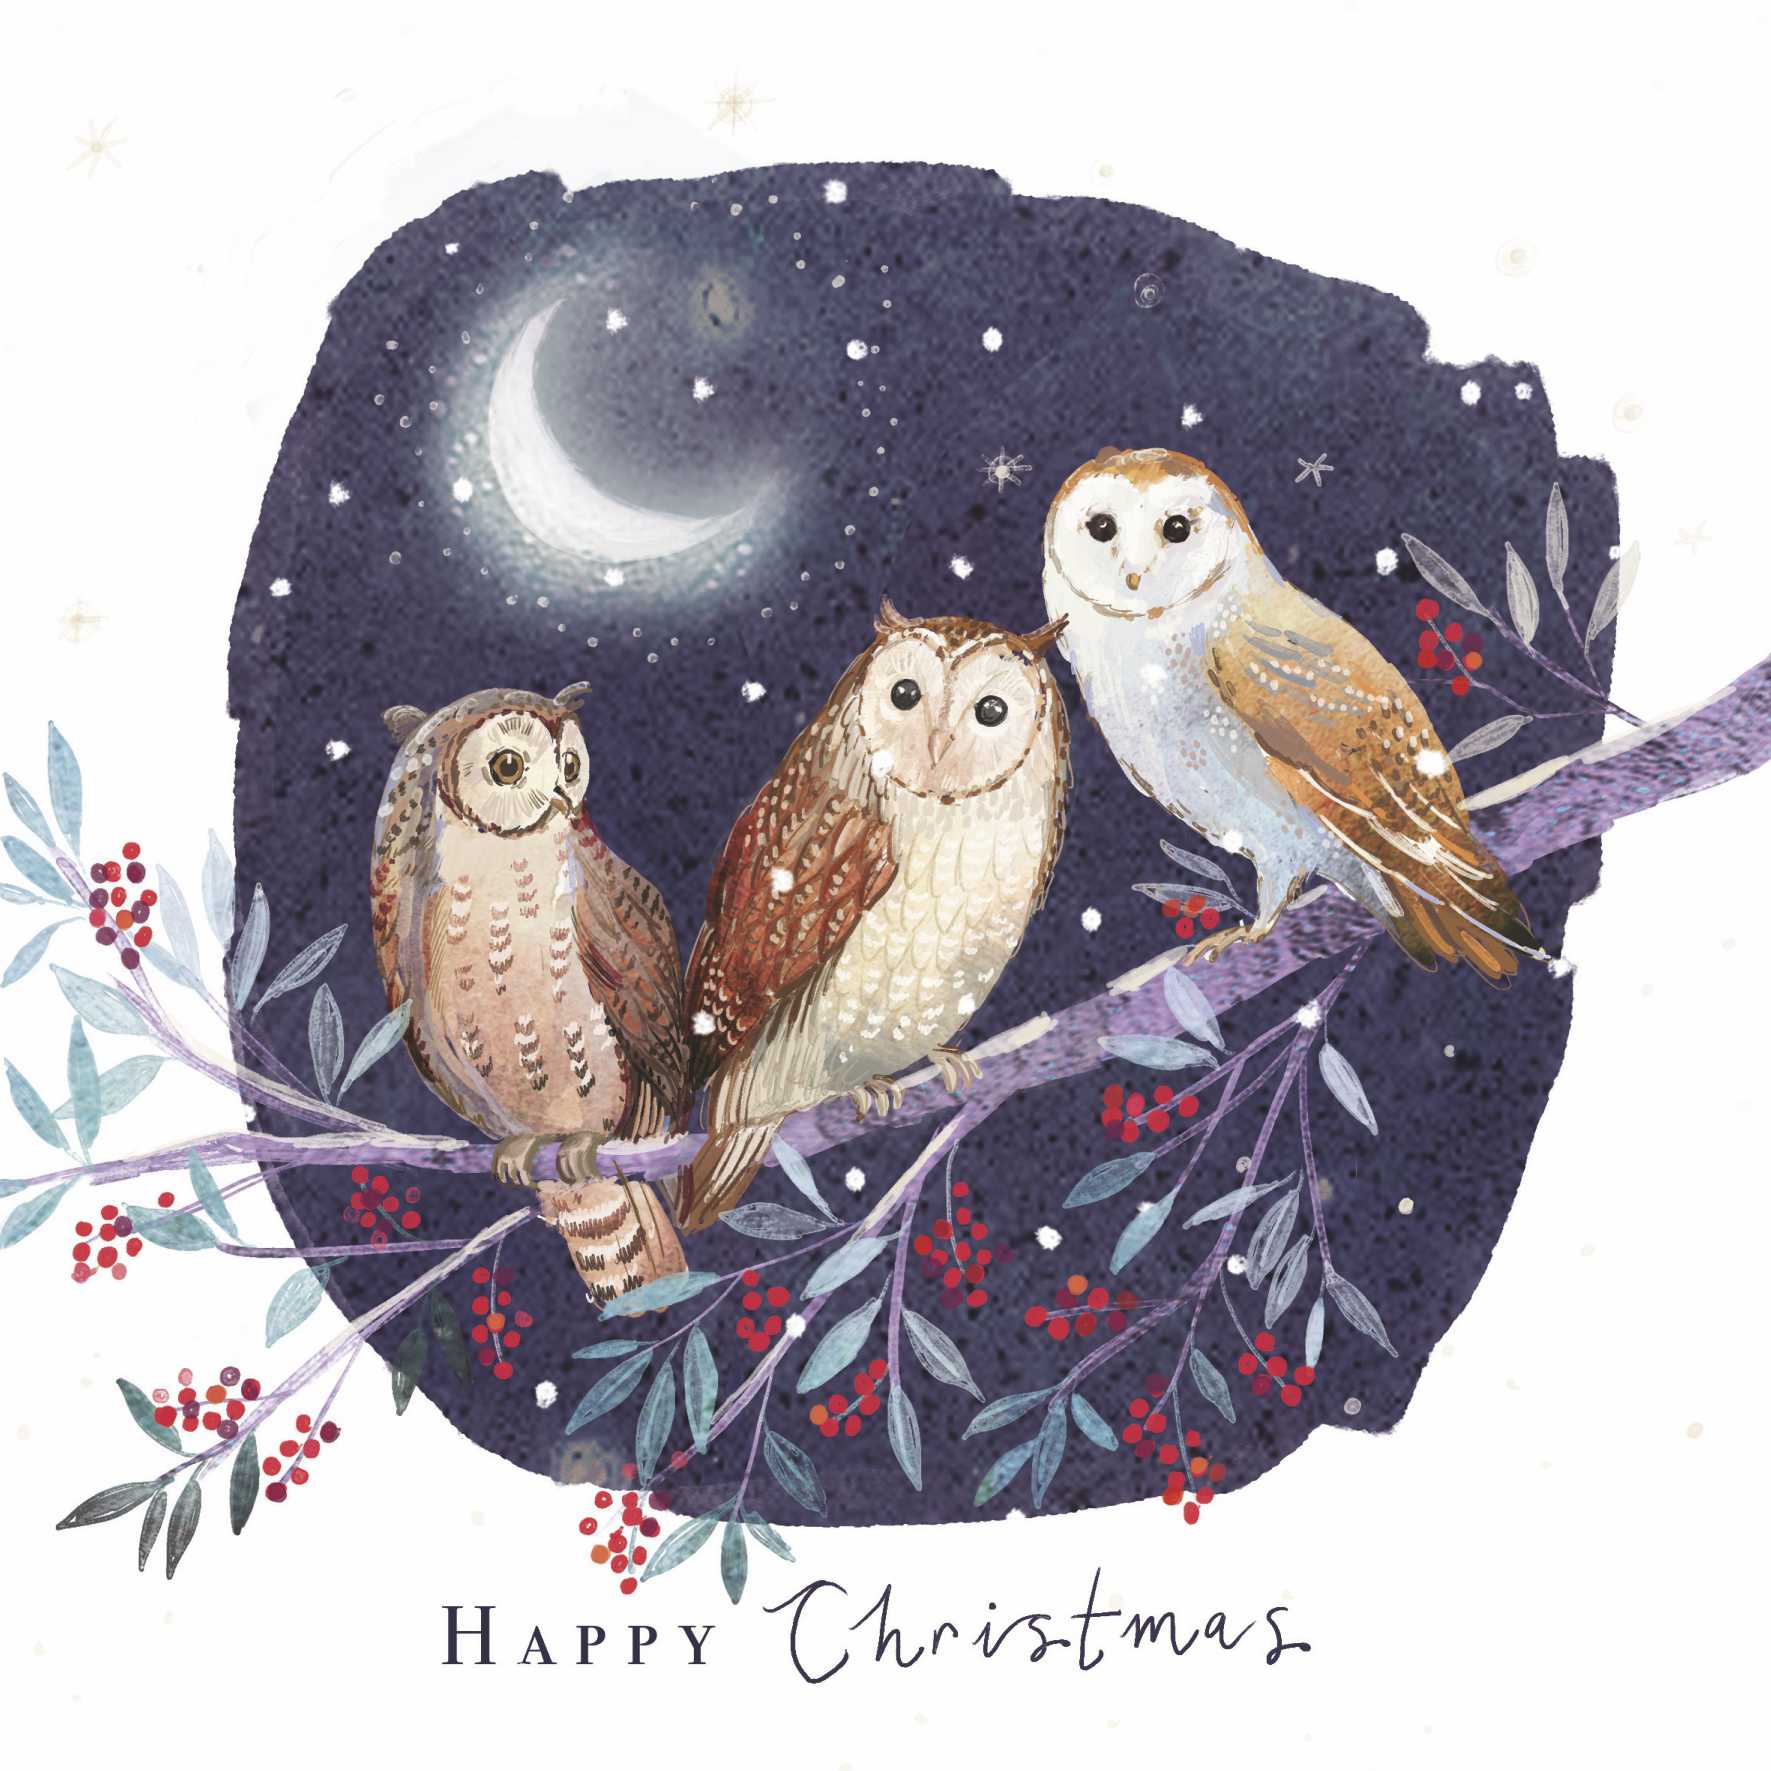 Illustration. Three owls are perched on a branch. Red berries hang from the branch and a crescent moon is shining in the background. Text reads Happy Christmas.